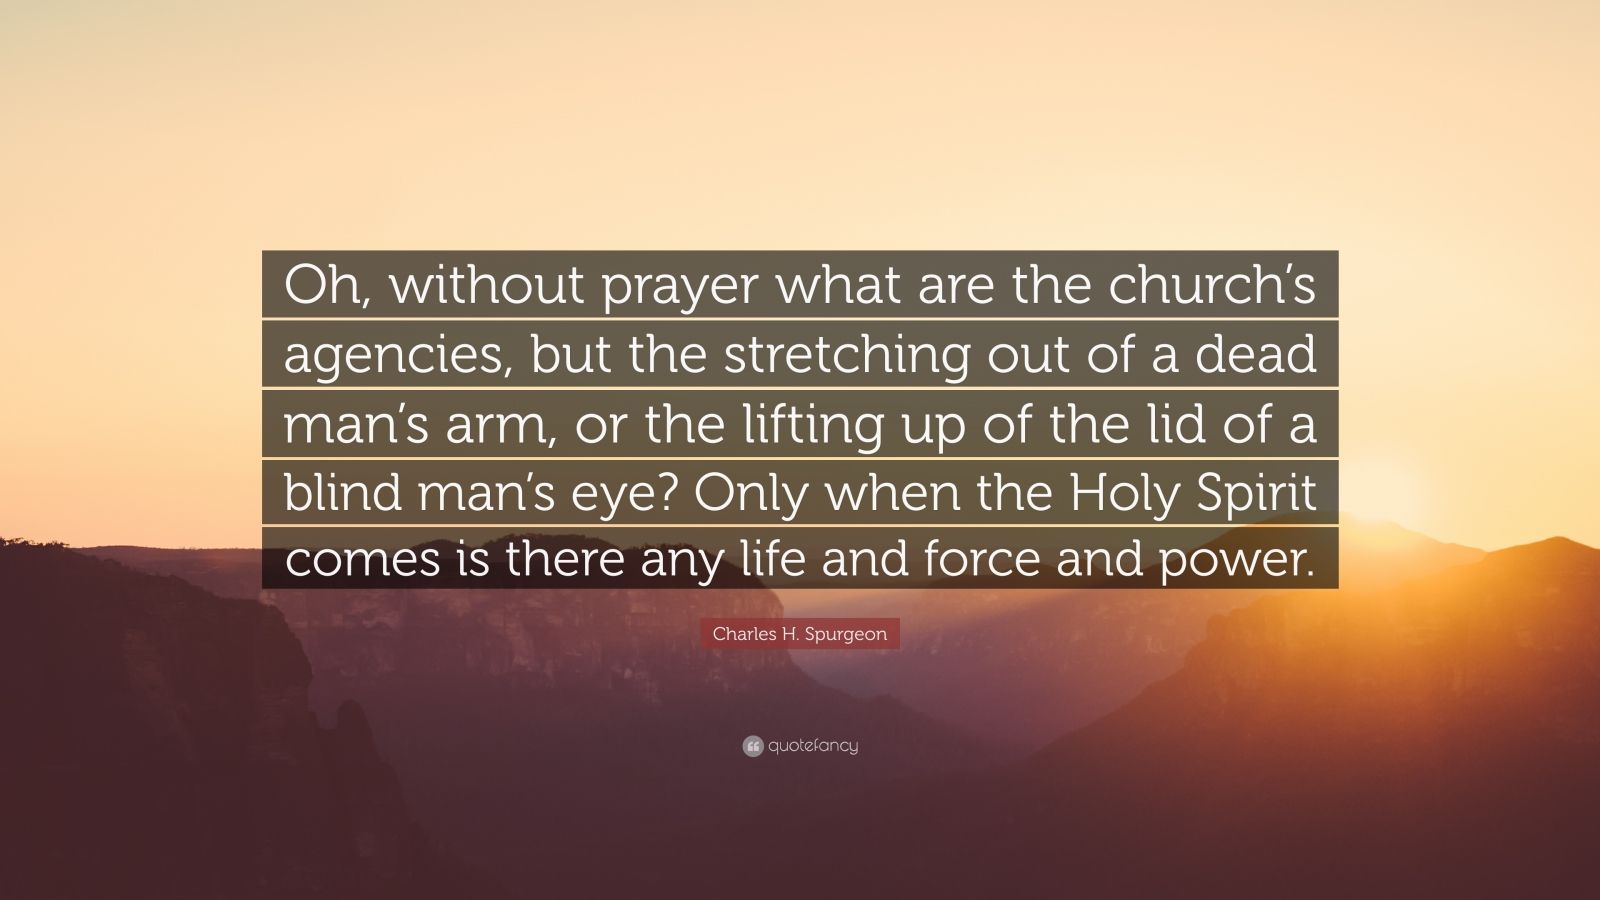 Charles H. Spurgeon Quote: “Oh, without prayer what are the church’s ...